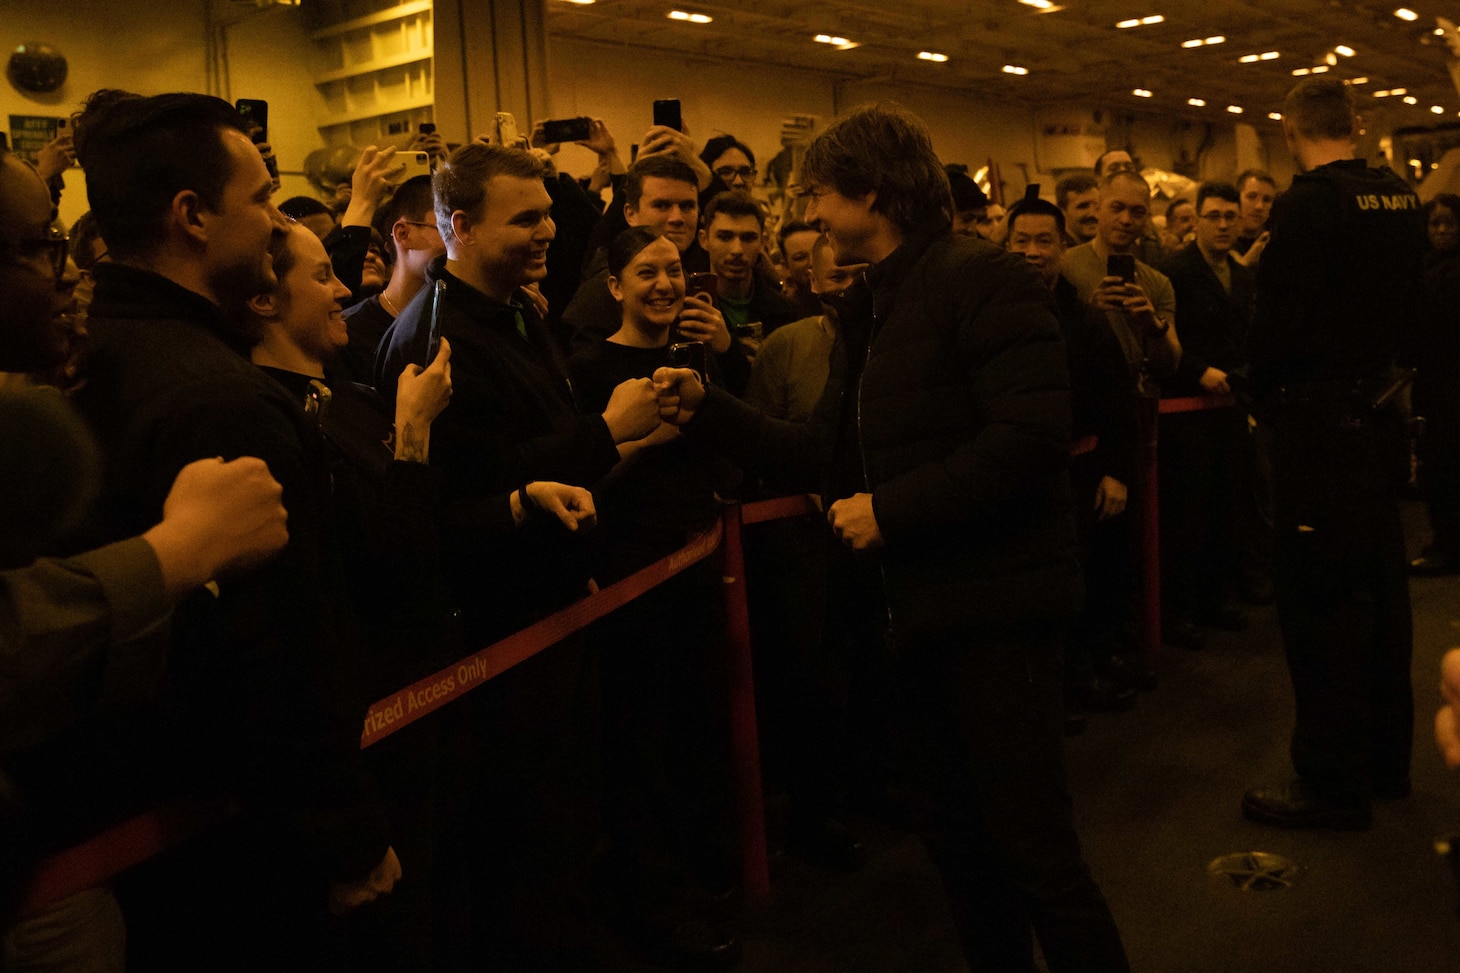 ADRIATIC SEA (March 2, 2023) Tom Cruise fist bumps a Sailor during a meet-and-greet aboard the Nimitz-class aircraft carrier USS George H.W. Bush (CVN 77), March 2, 2023. The George H.W. Bush Carrier Strike Group is on a scheduled deployment in the U.S. Naval Forces Europe area of operations, employed by U.S. Sixth Fleet to defend U.S., allied and partner interests.